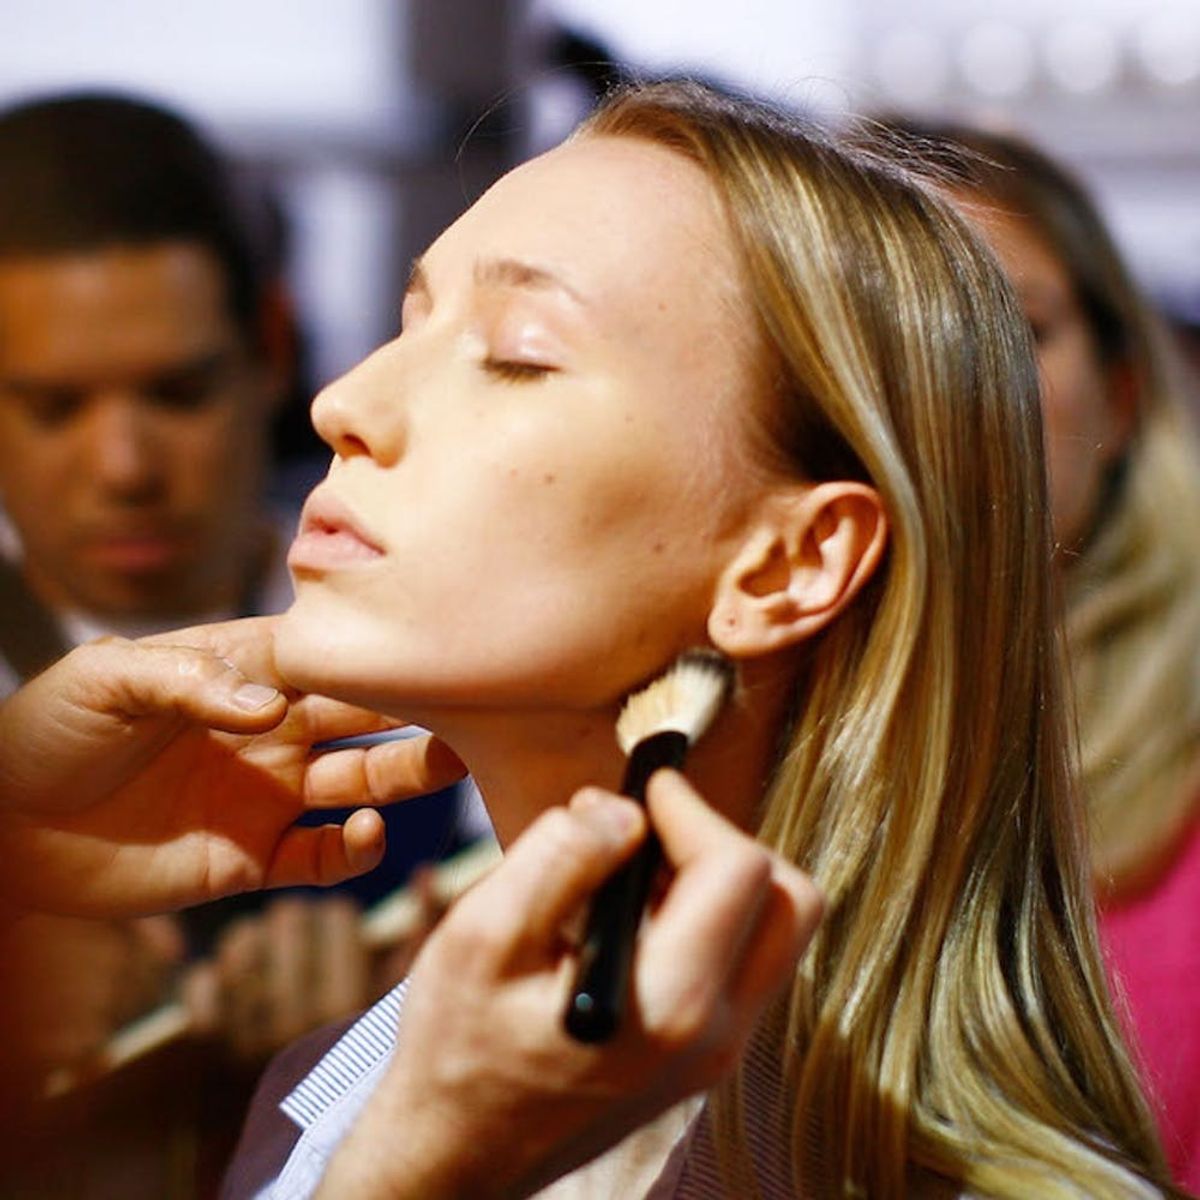 Meet Glazing: The Chroming + Contouring Hybrid That’ll Change Your Life